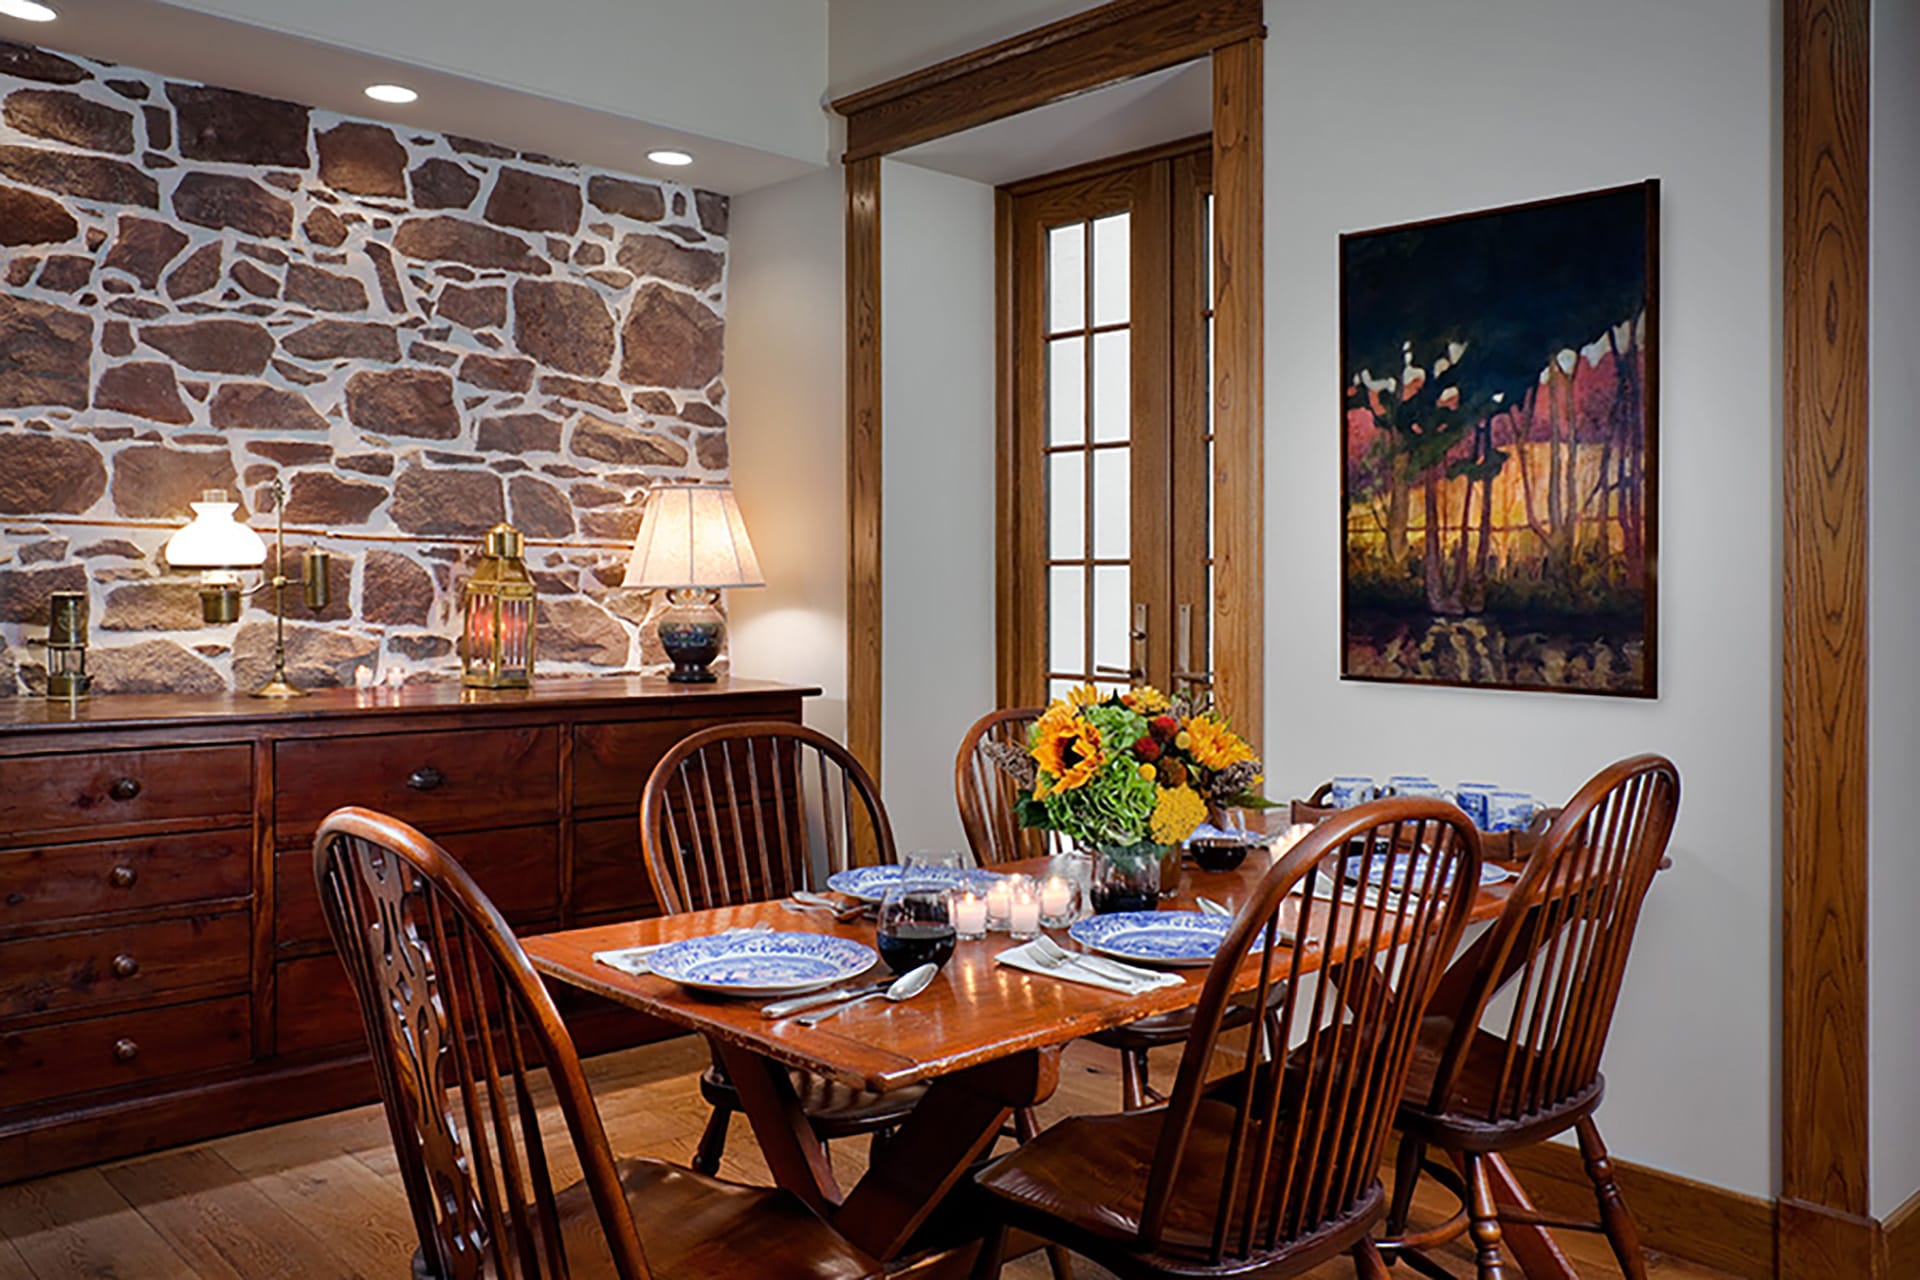 Dining room with a wood table, chairs, and molding, and an original brownstone accent wall